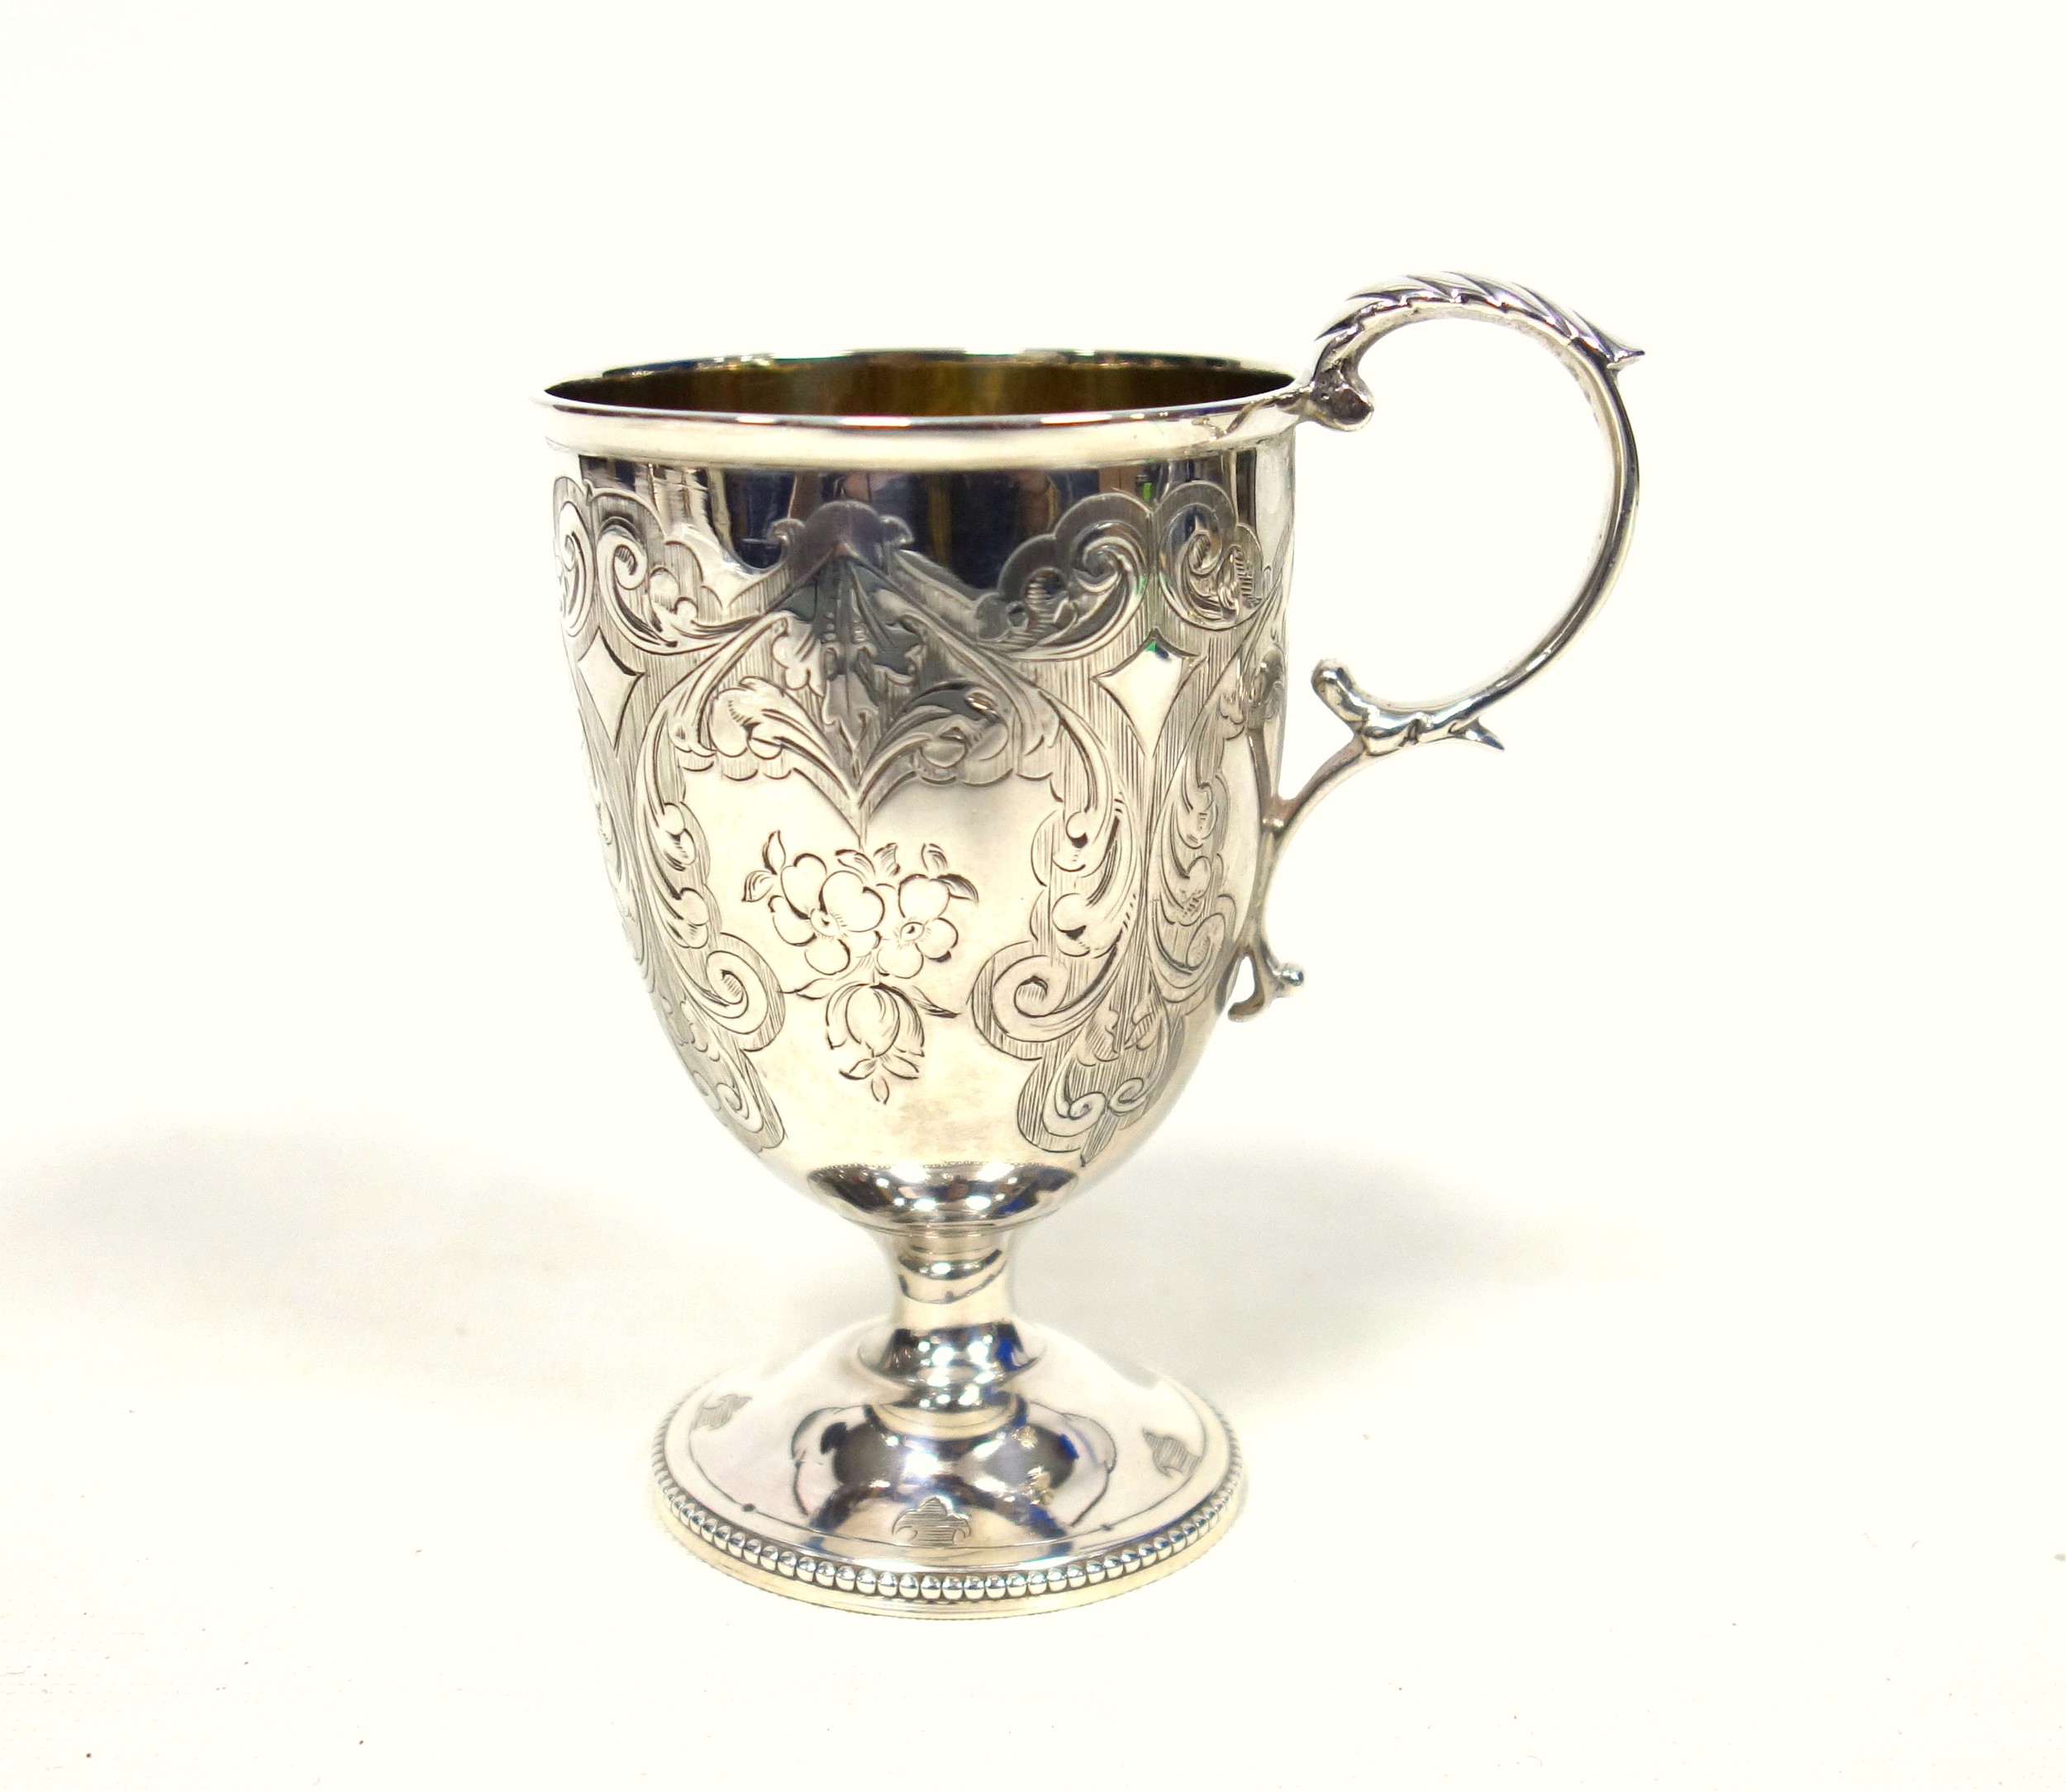 Victorian silver pedestal christening mug with all-over chased floral decoration initialled "N", - Image 3 of 5